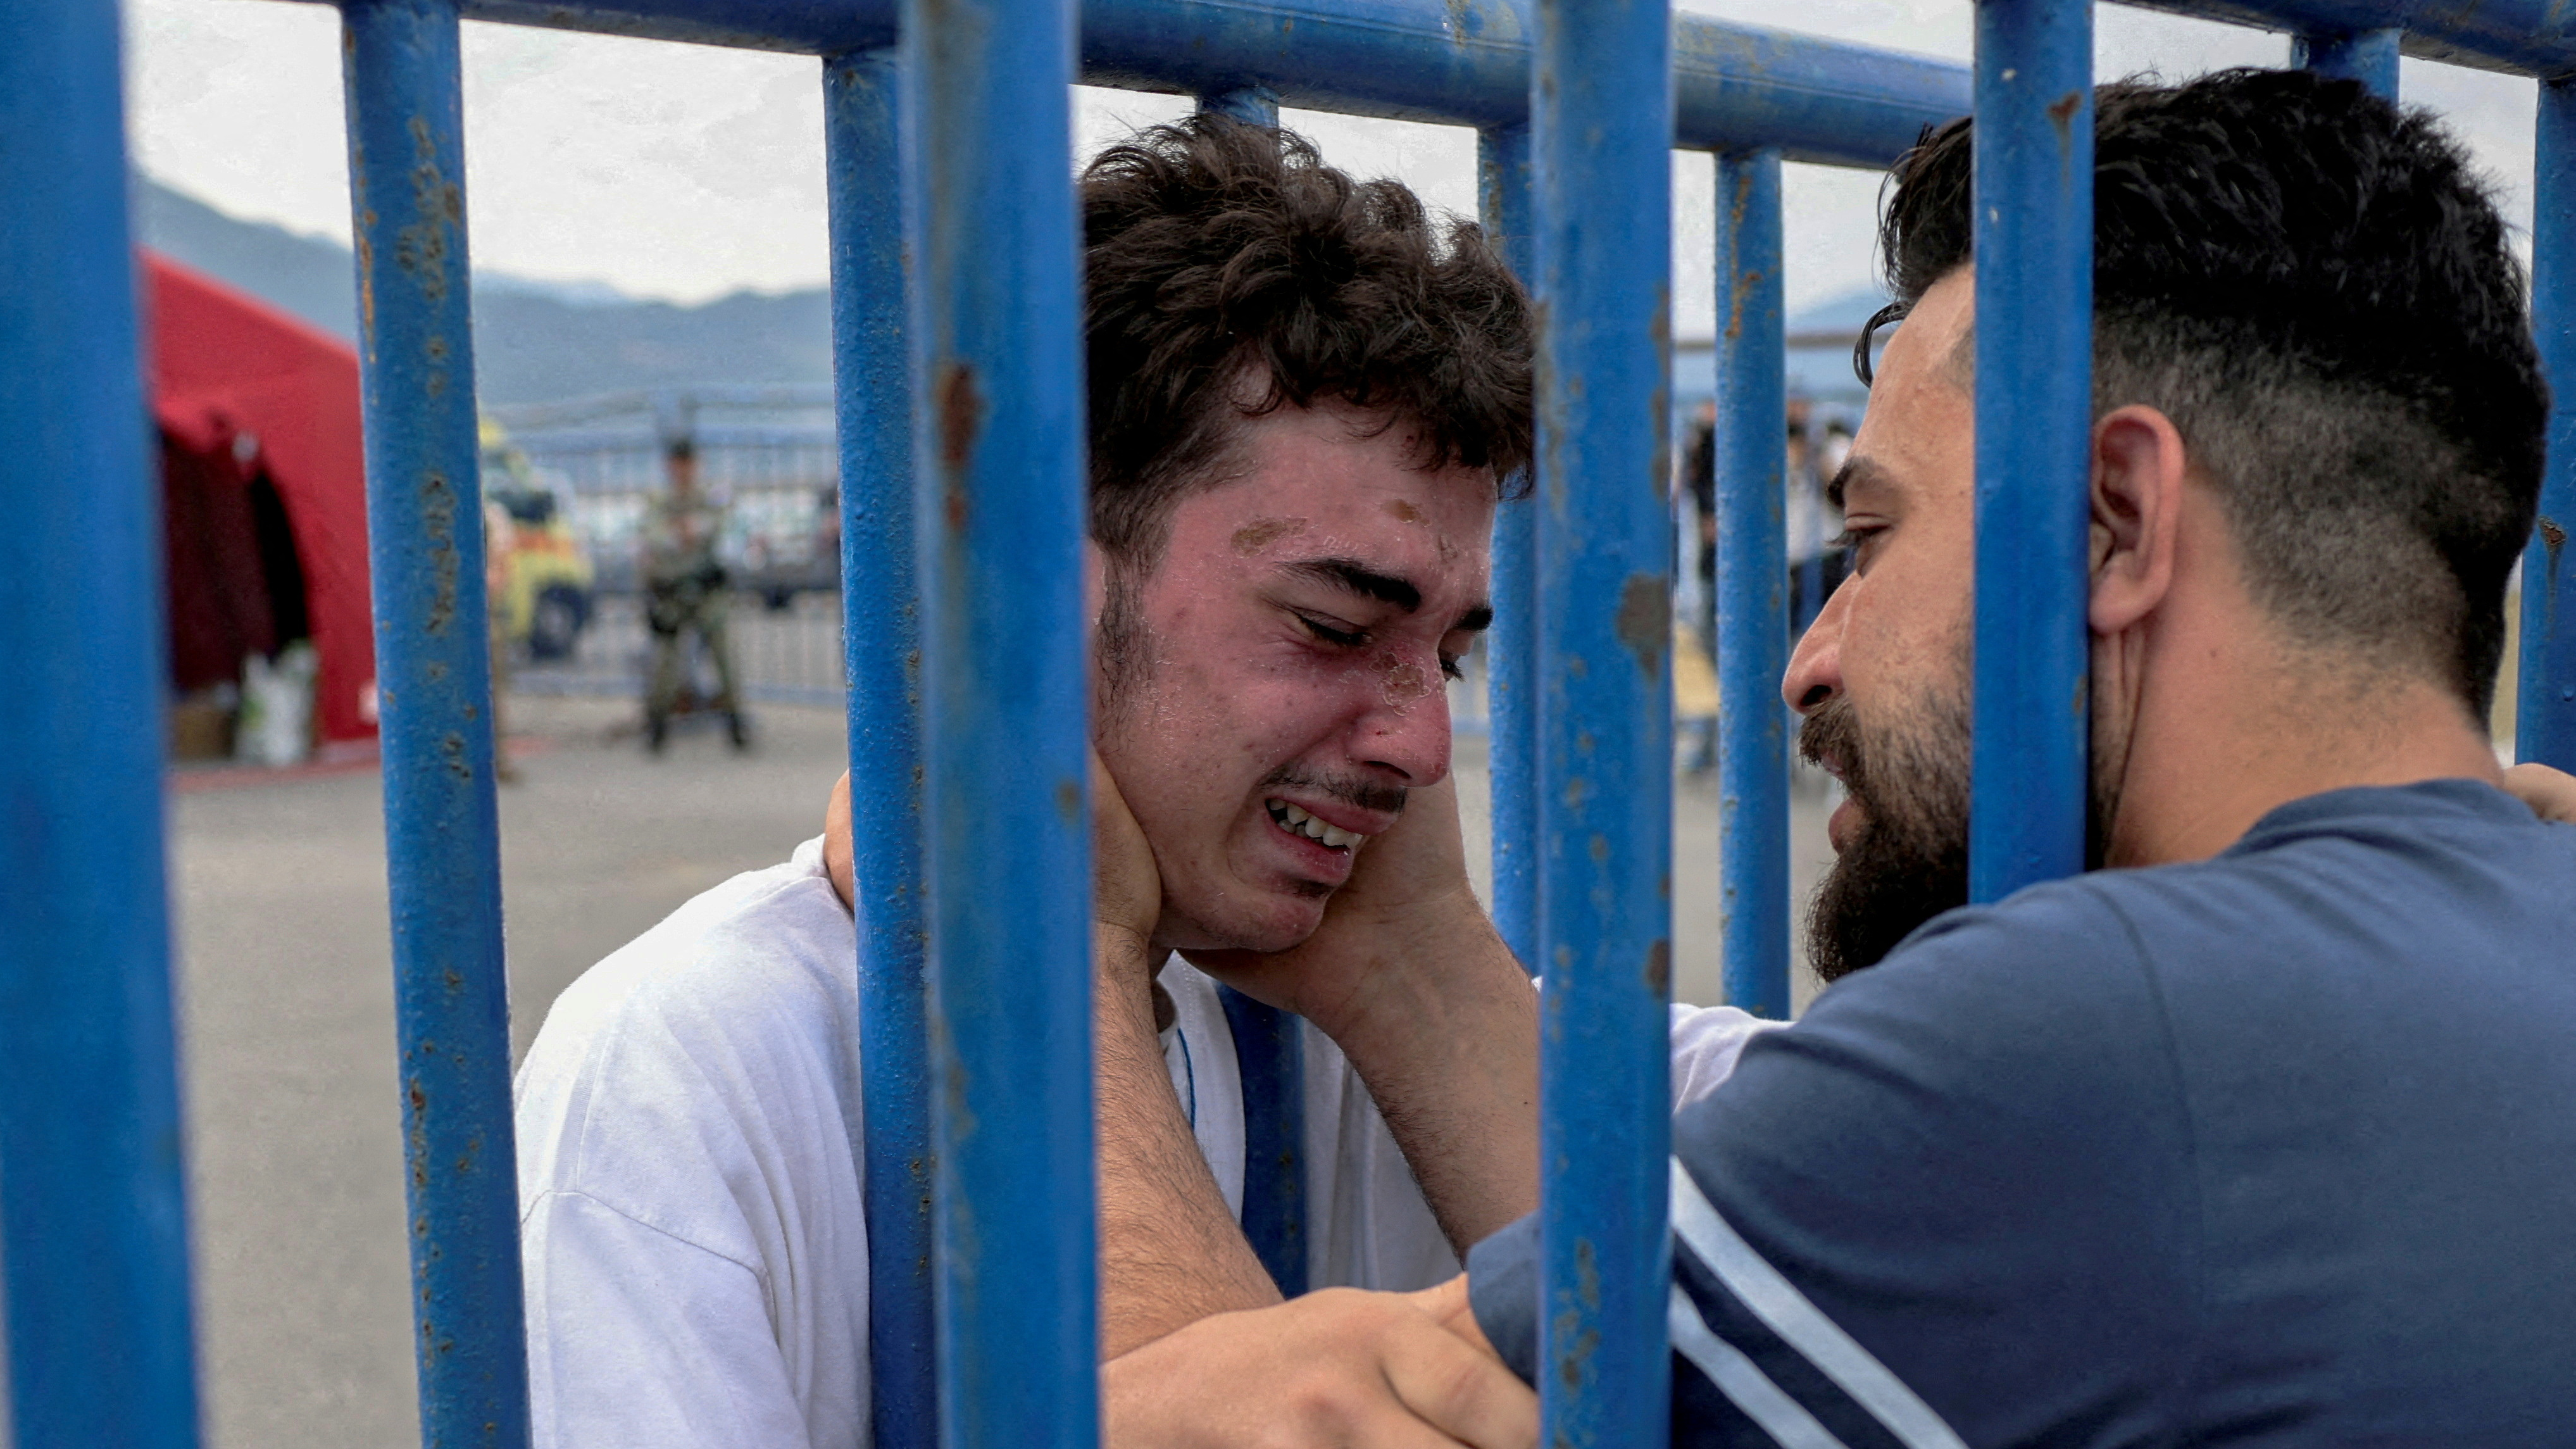 Syrian survivor Mohammad, 18, was rescued with other refugees and migrants at open sea off Greece after their boat capsized in June. But thousands of migrants haven't been as lucky./Reuters/Stelios Misinas.